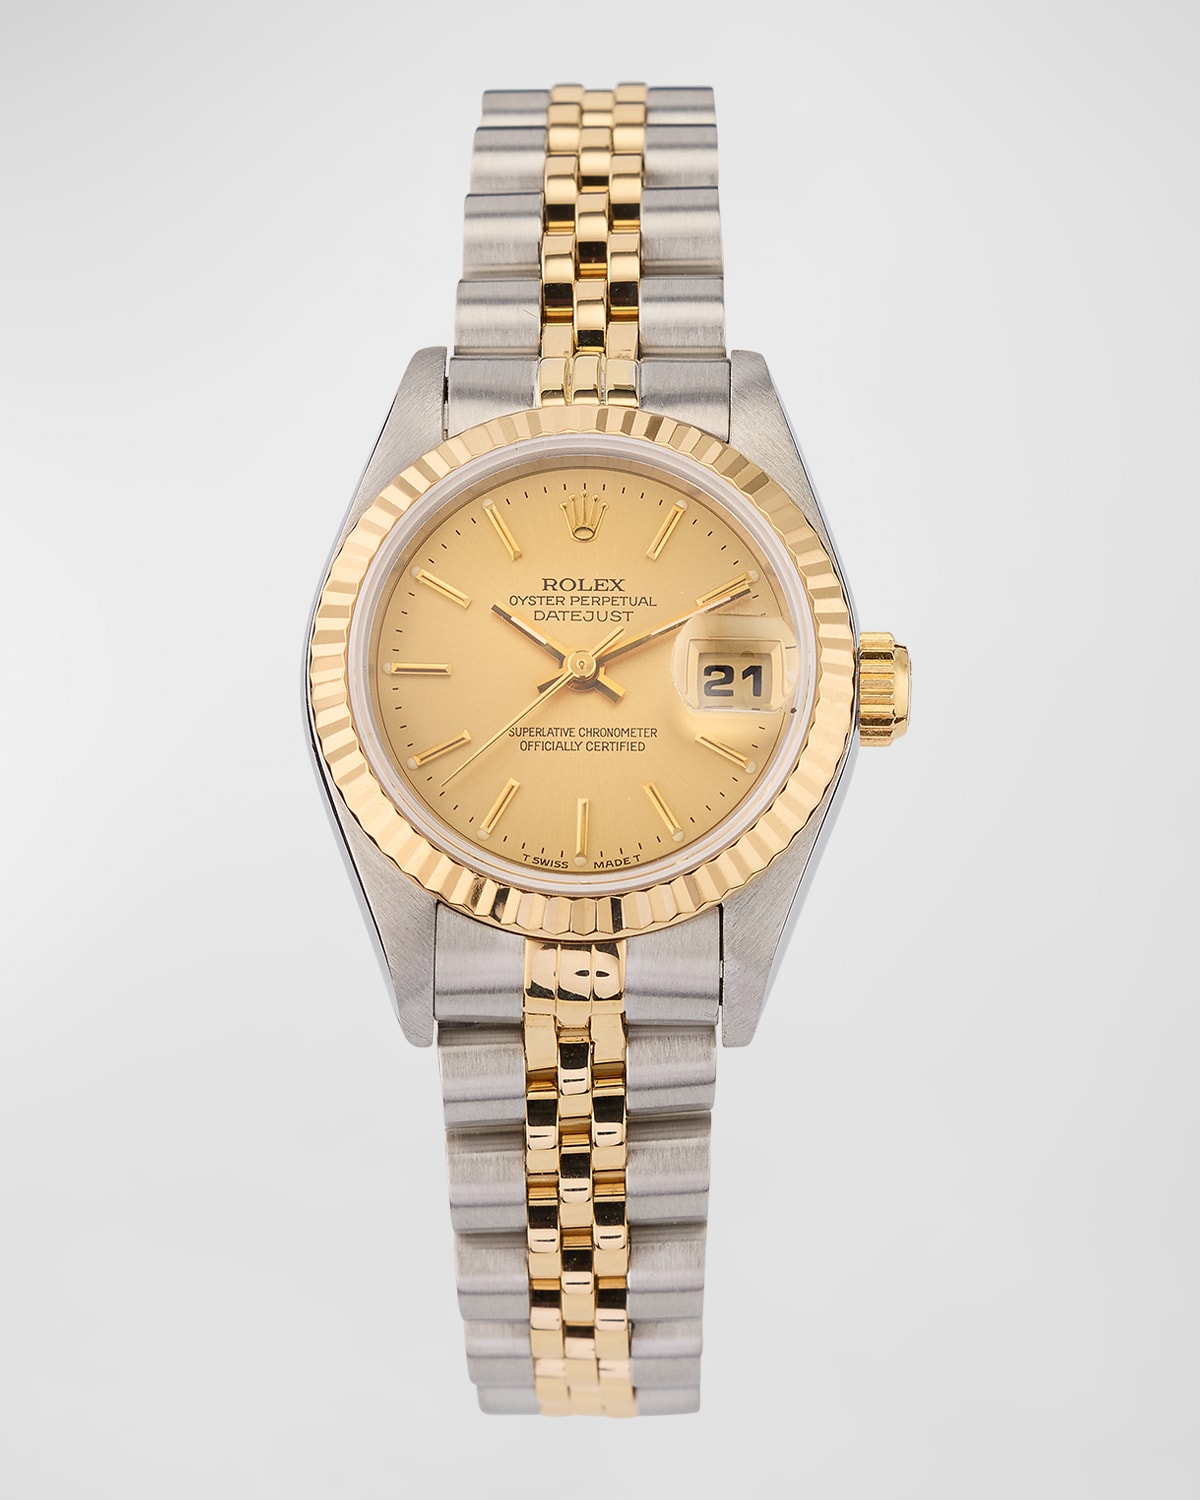 Rolex Oyster Perpetual Datejust 26mm Vintage 1995 Watch